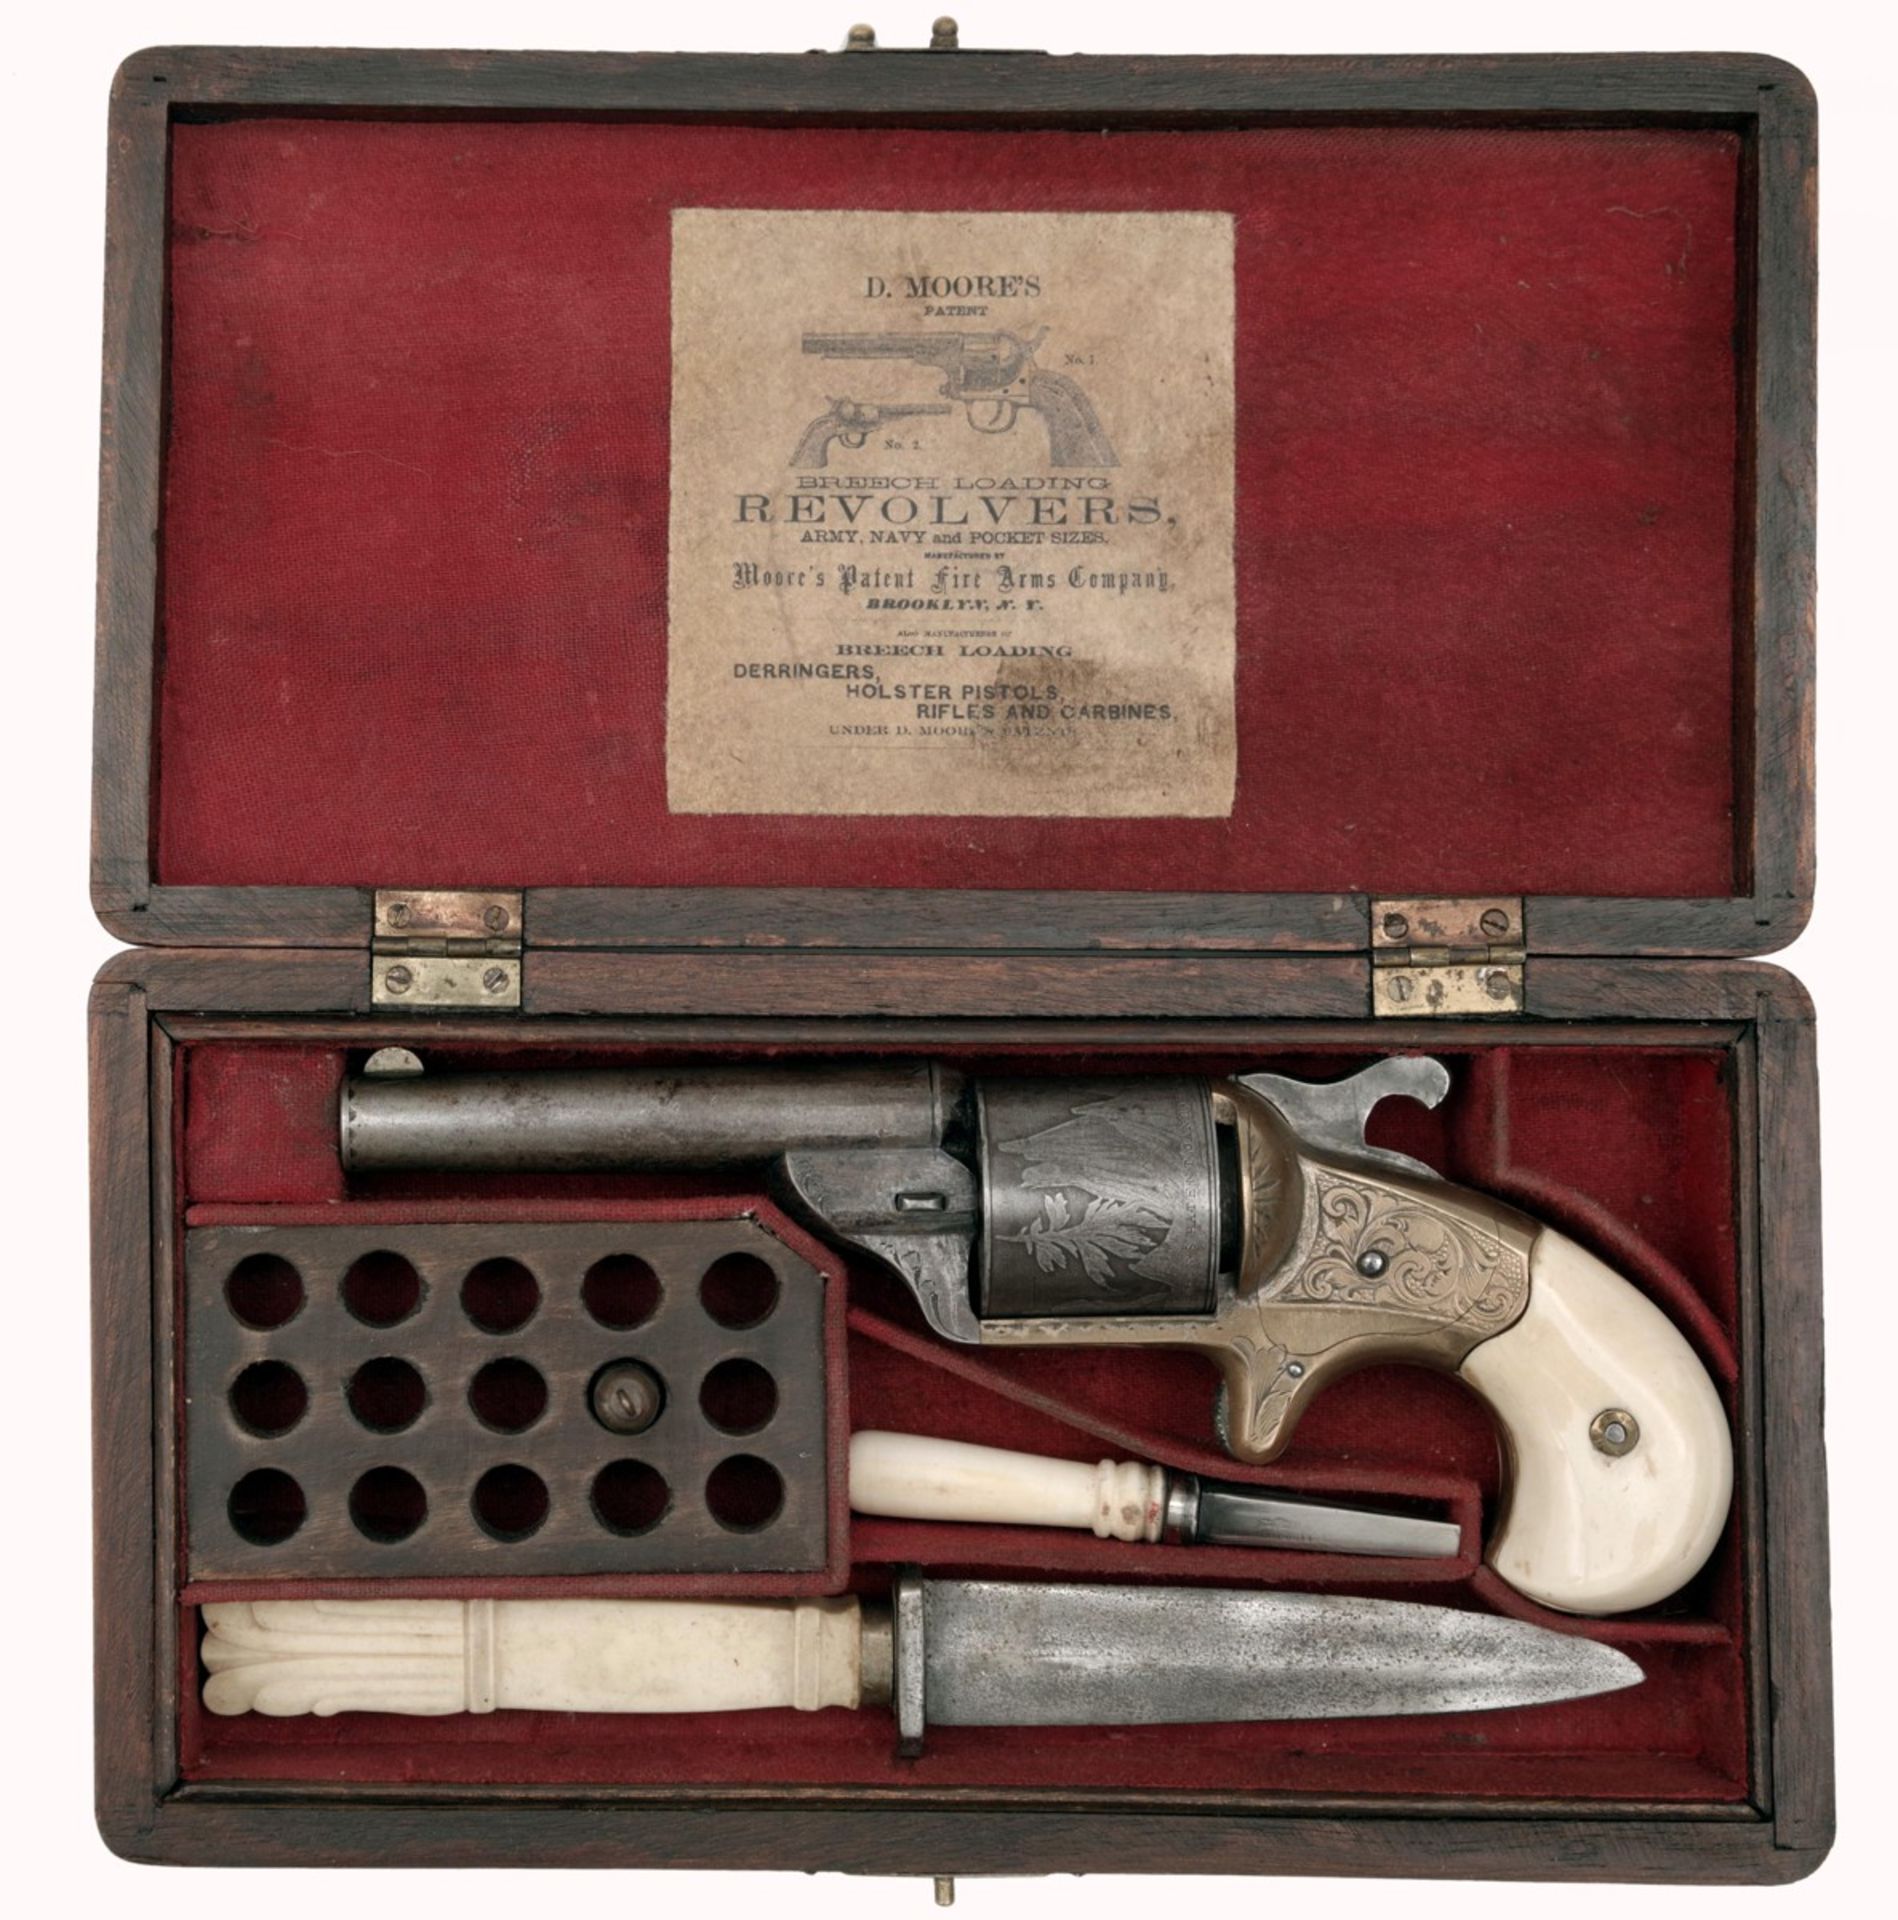 A Cased Moores Patent Firearms Co Teatfire Front Loading Revolver